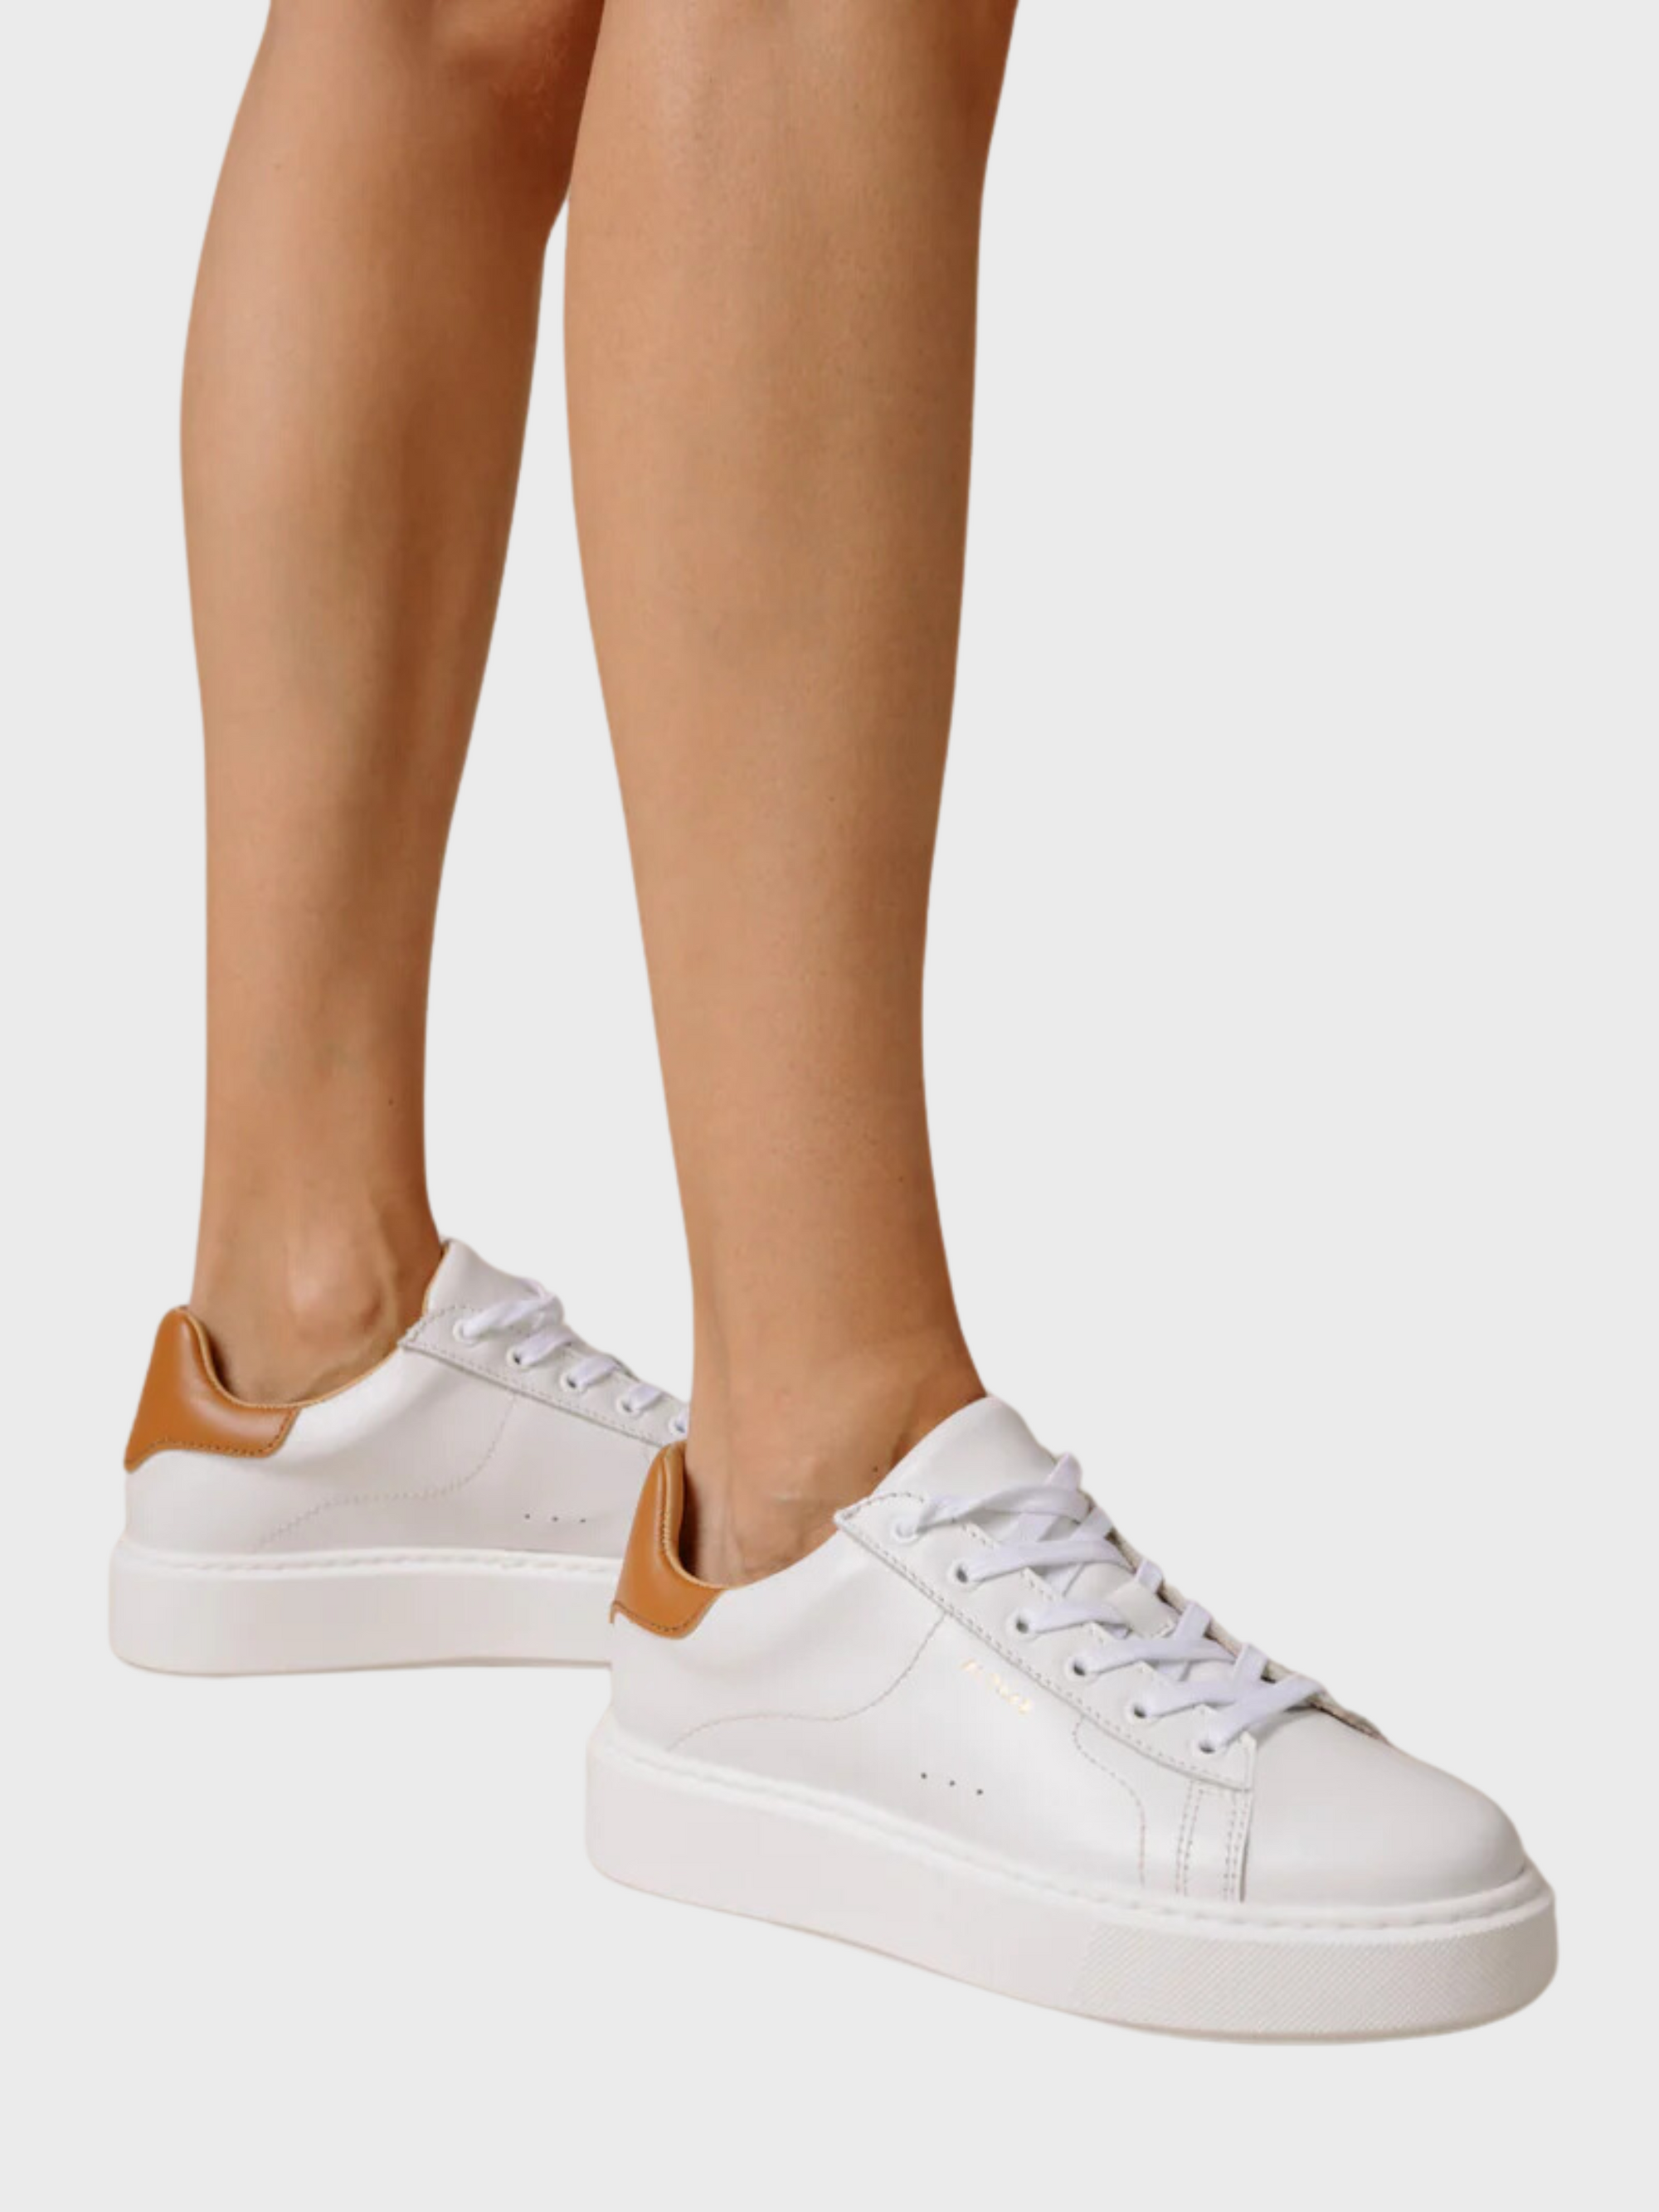 ALOHAS tb.65 Sneakers Bright White Tan-Sneakers-36-West of Woodward Boutique-Vancouver-Canada